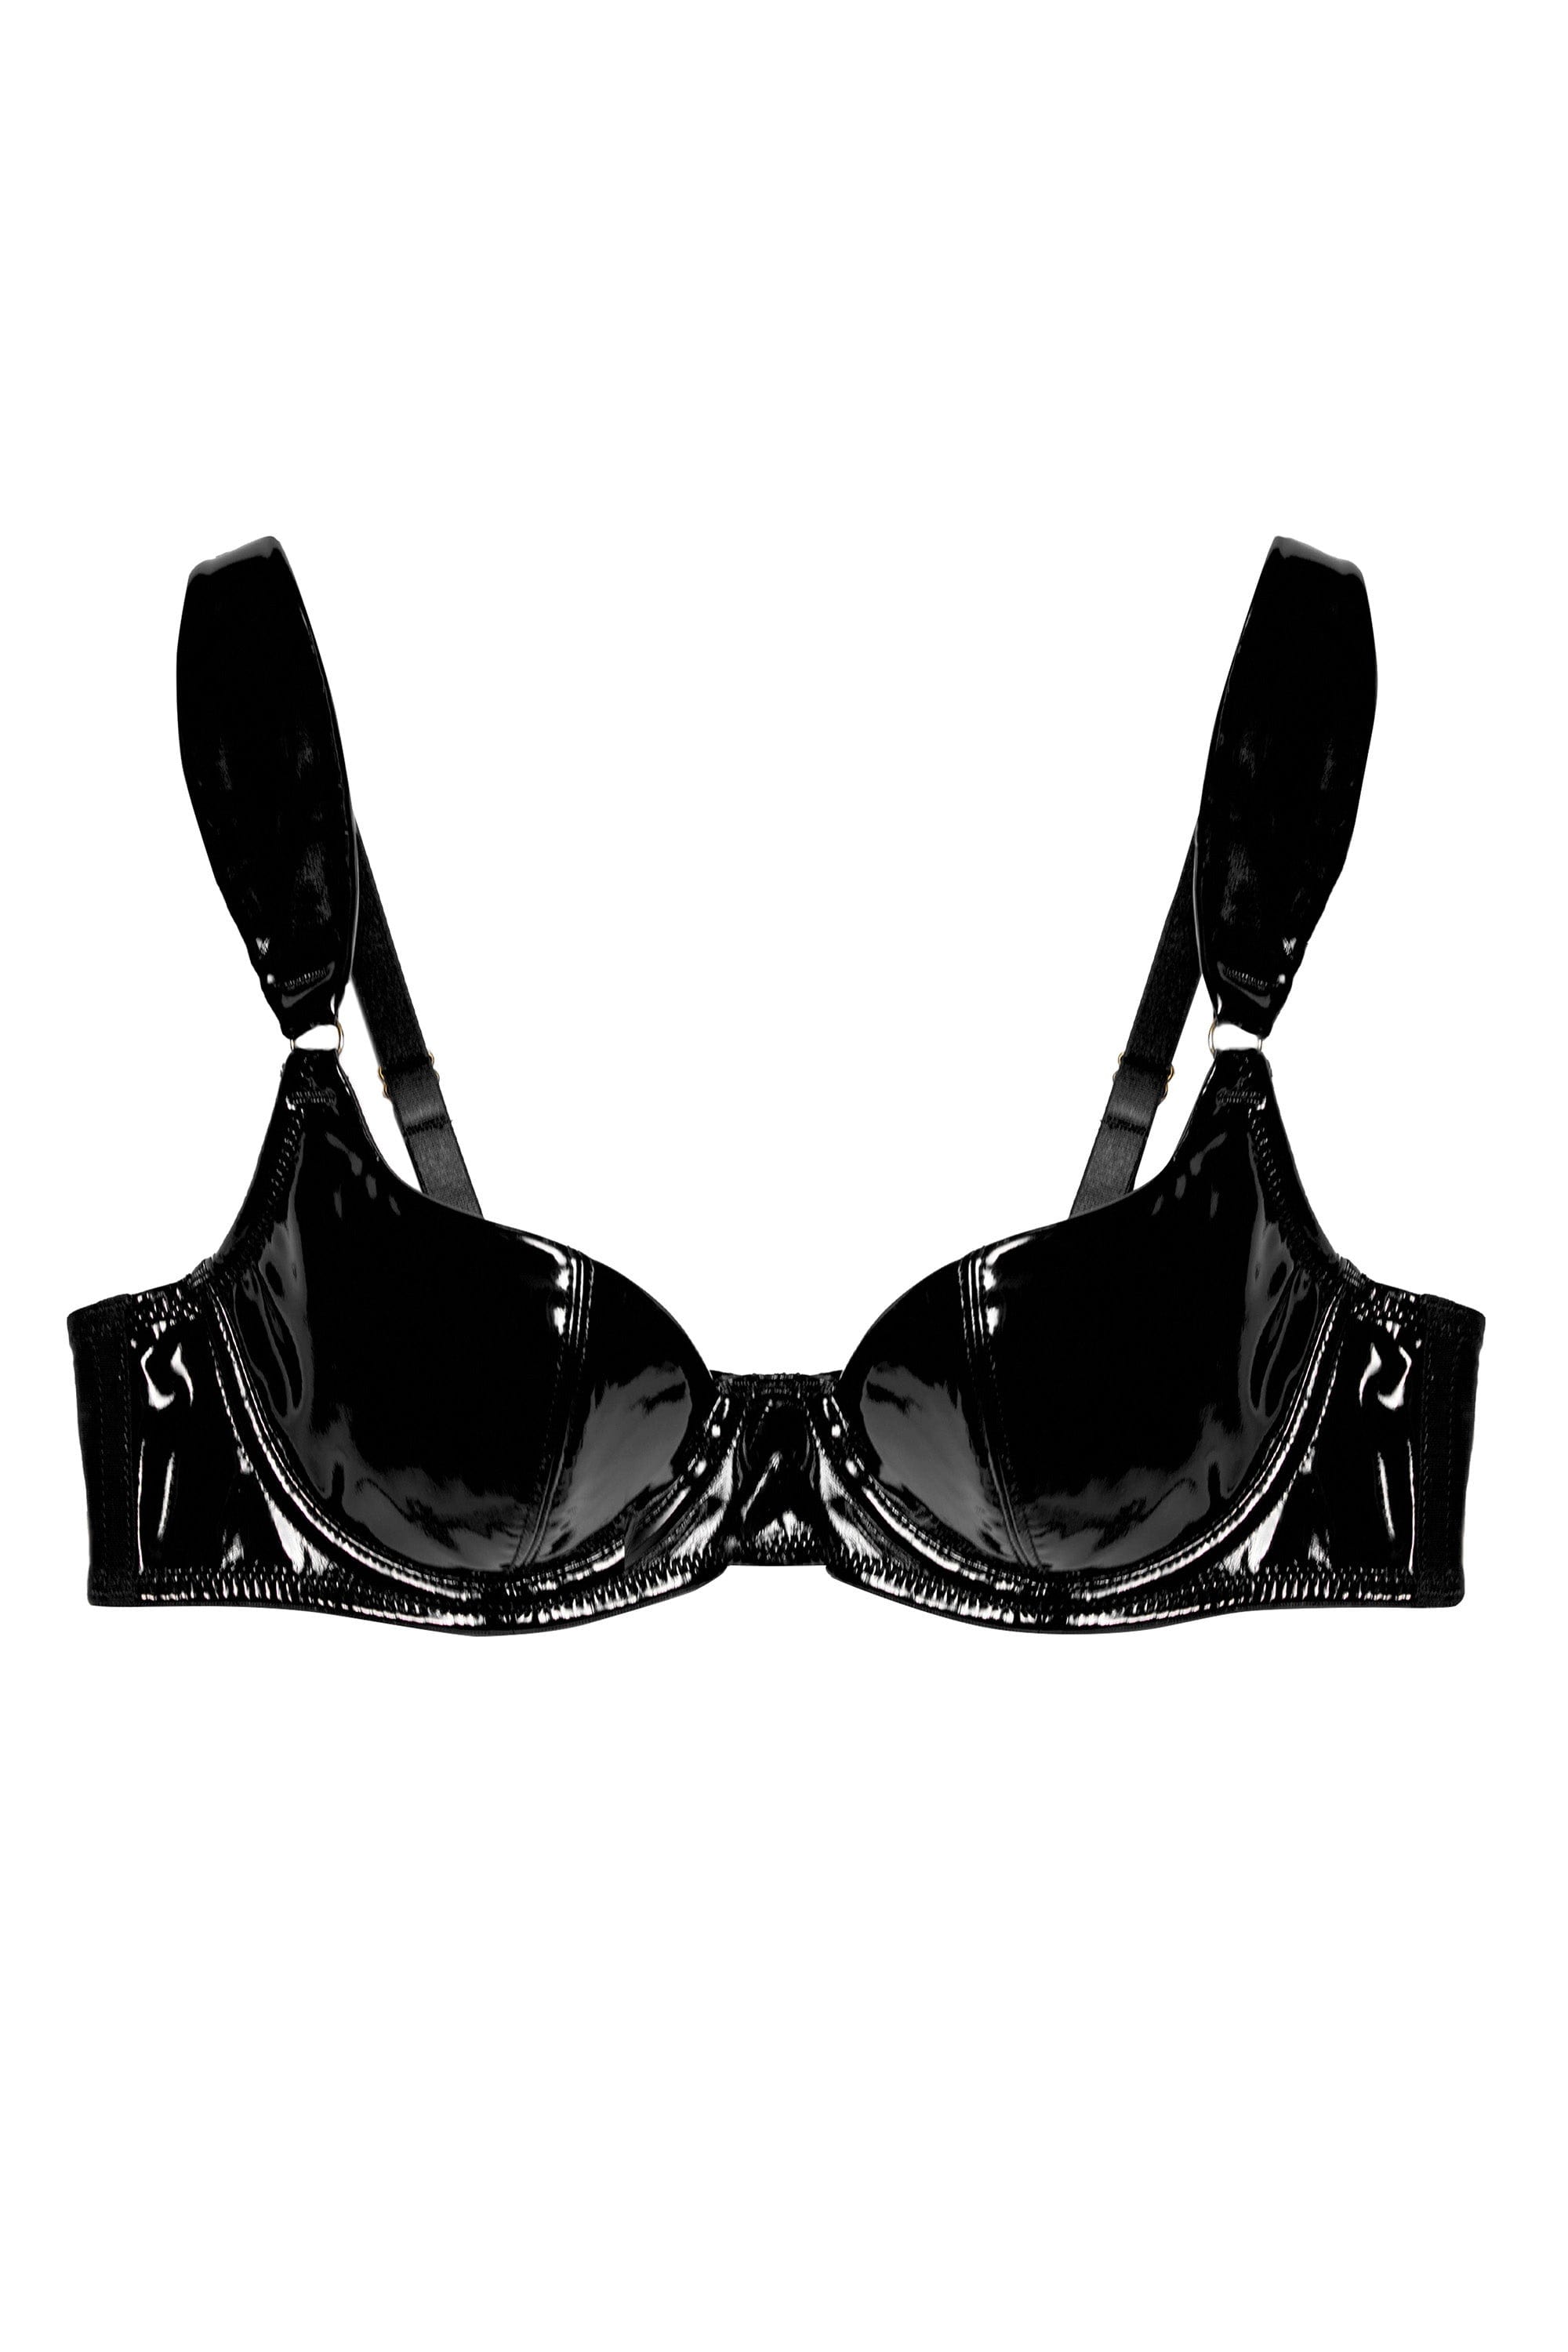 Maxine Black Moulded Cup Bra: Fit Fully Yours  LaBella Intimates – LaBella  Intimates & Boutique